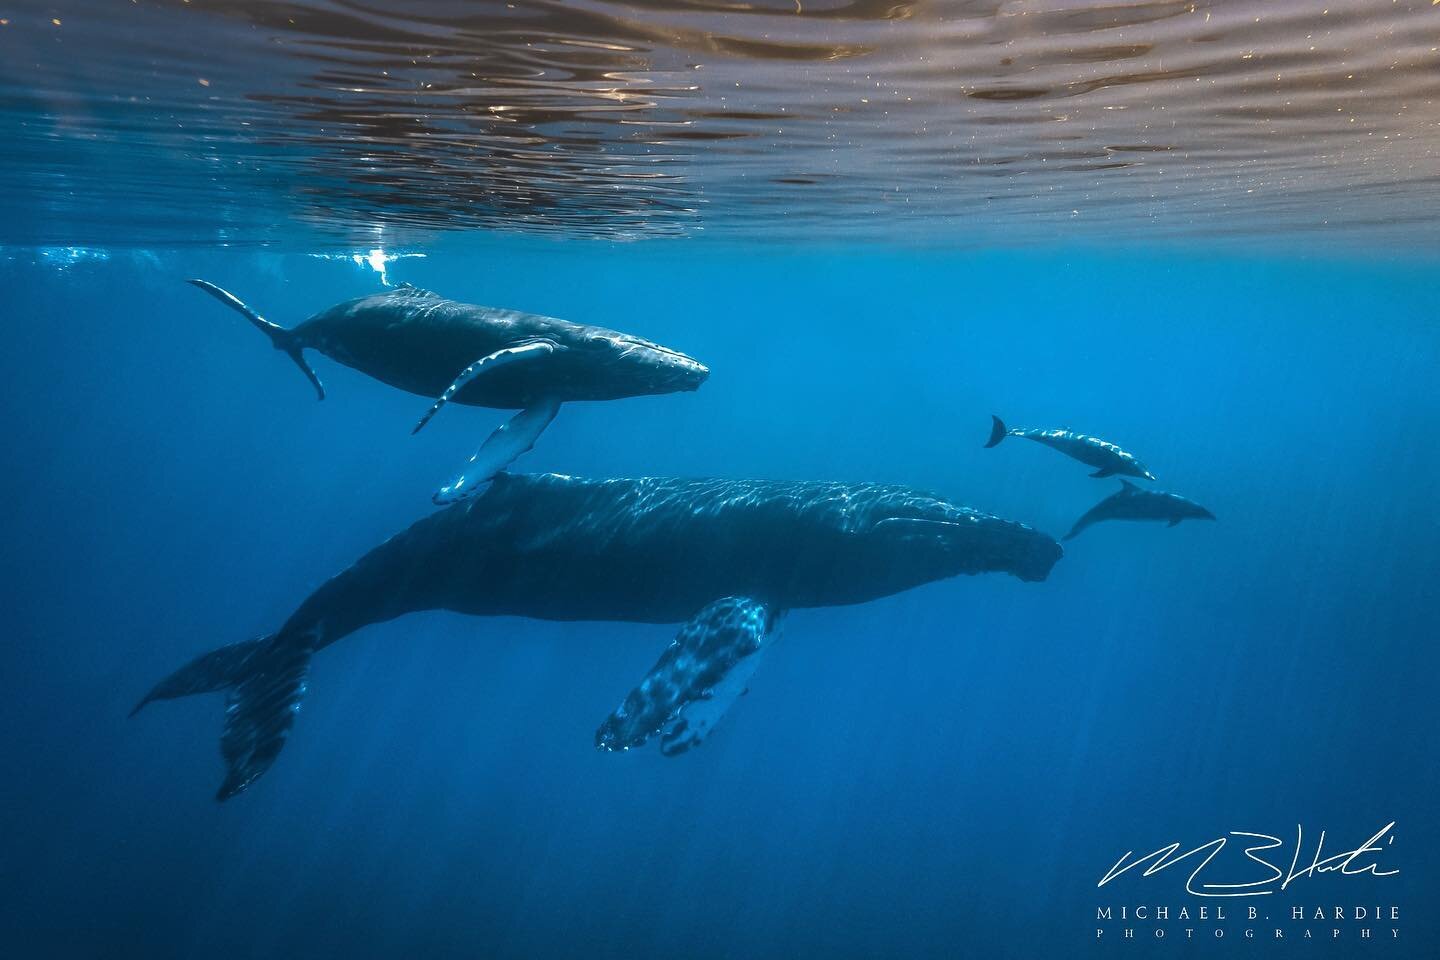 Black Fish, Blue Fish, Old Fish, New Fish

On #worldwhaleday , I can think of no better image to share than this. One of the most spectacular moments of my life was when I took this shot. I couldn't believe my eyes when this Humpback mother brought h